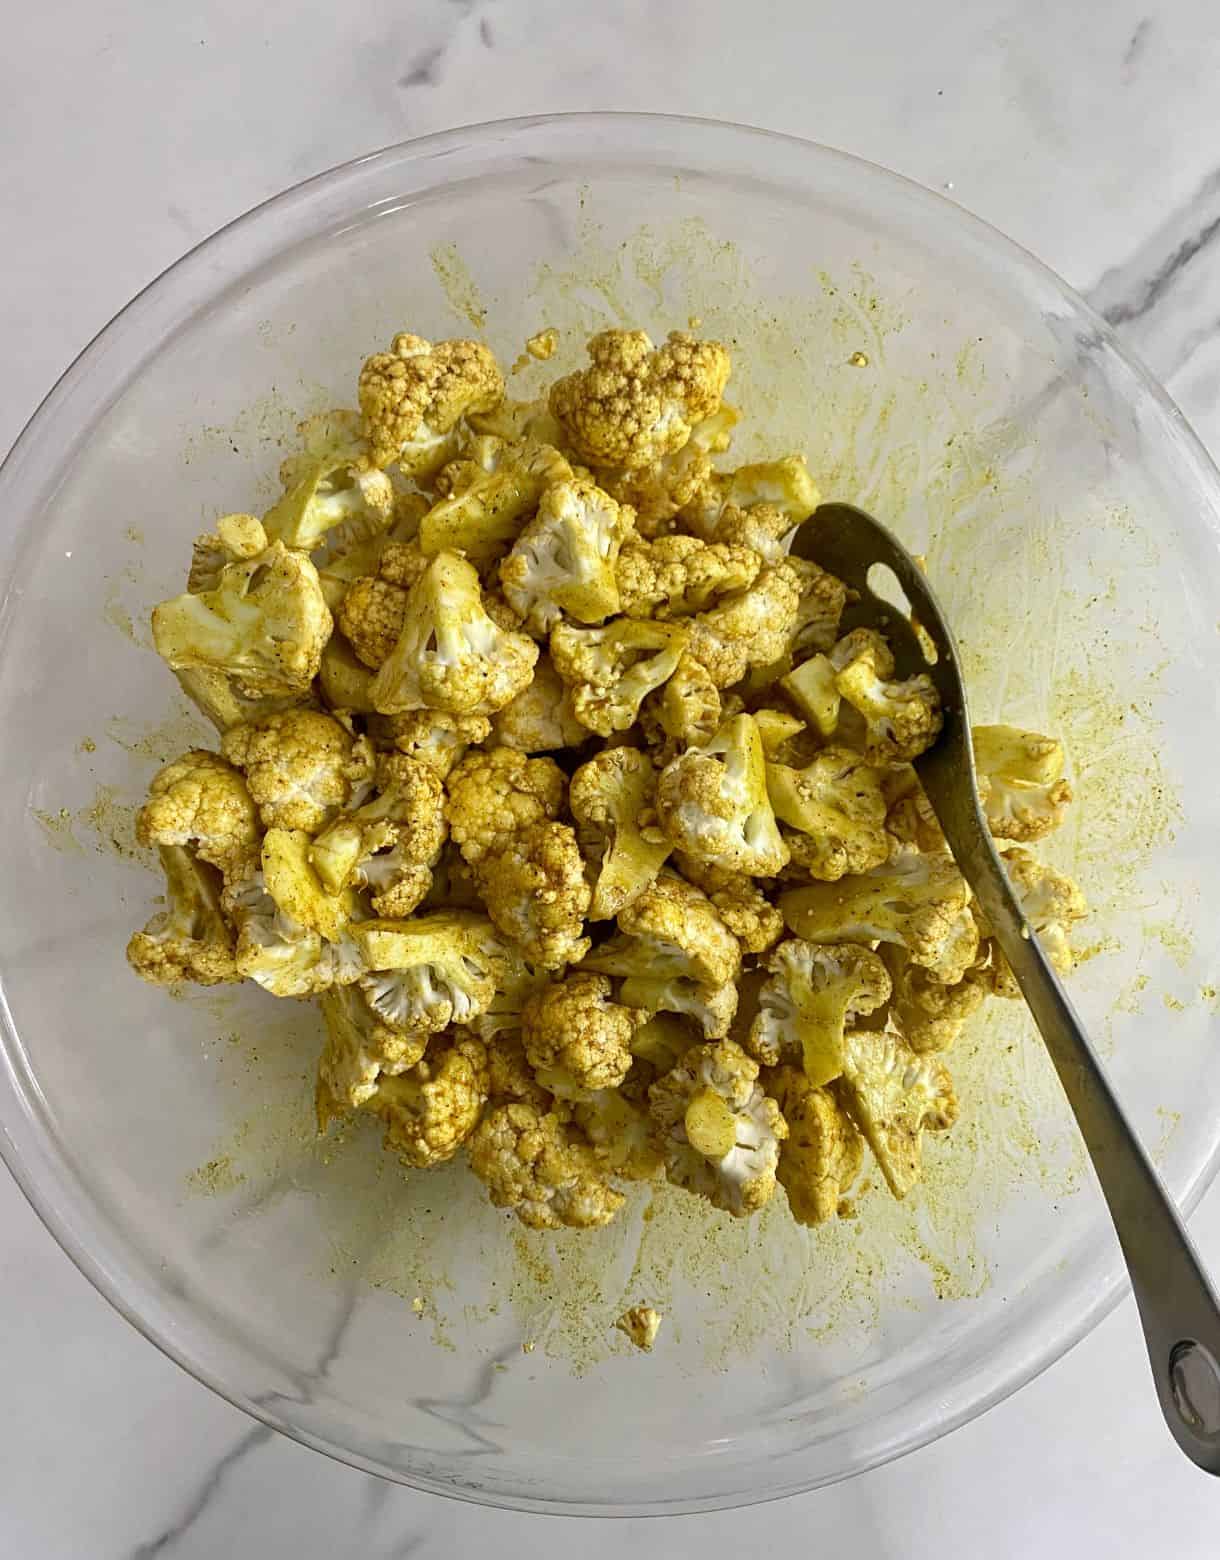 A bowl of cauliflower coated in oil and spices.